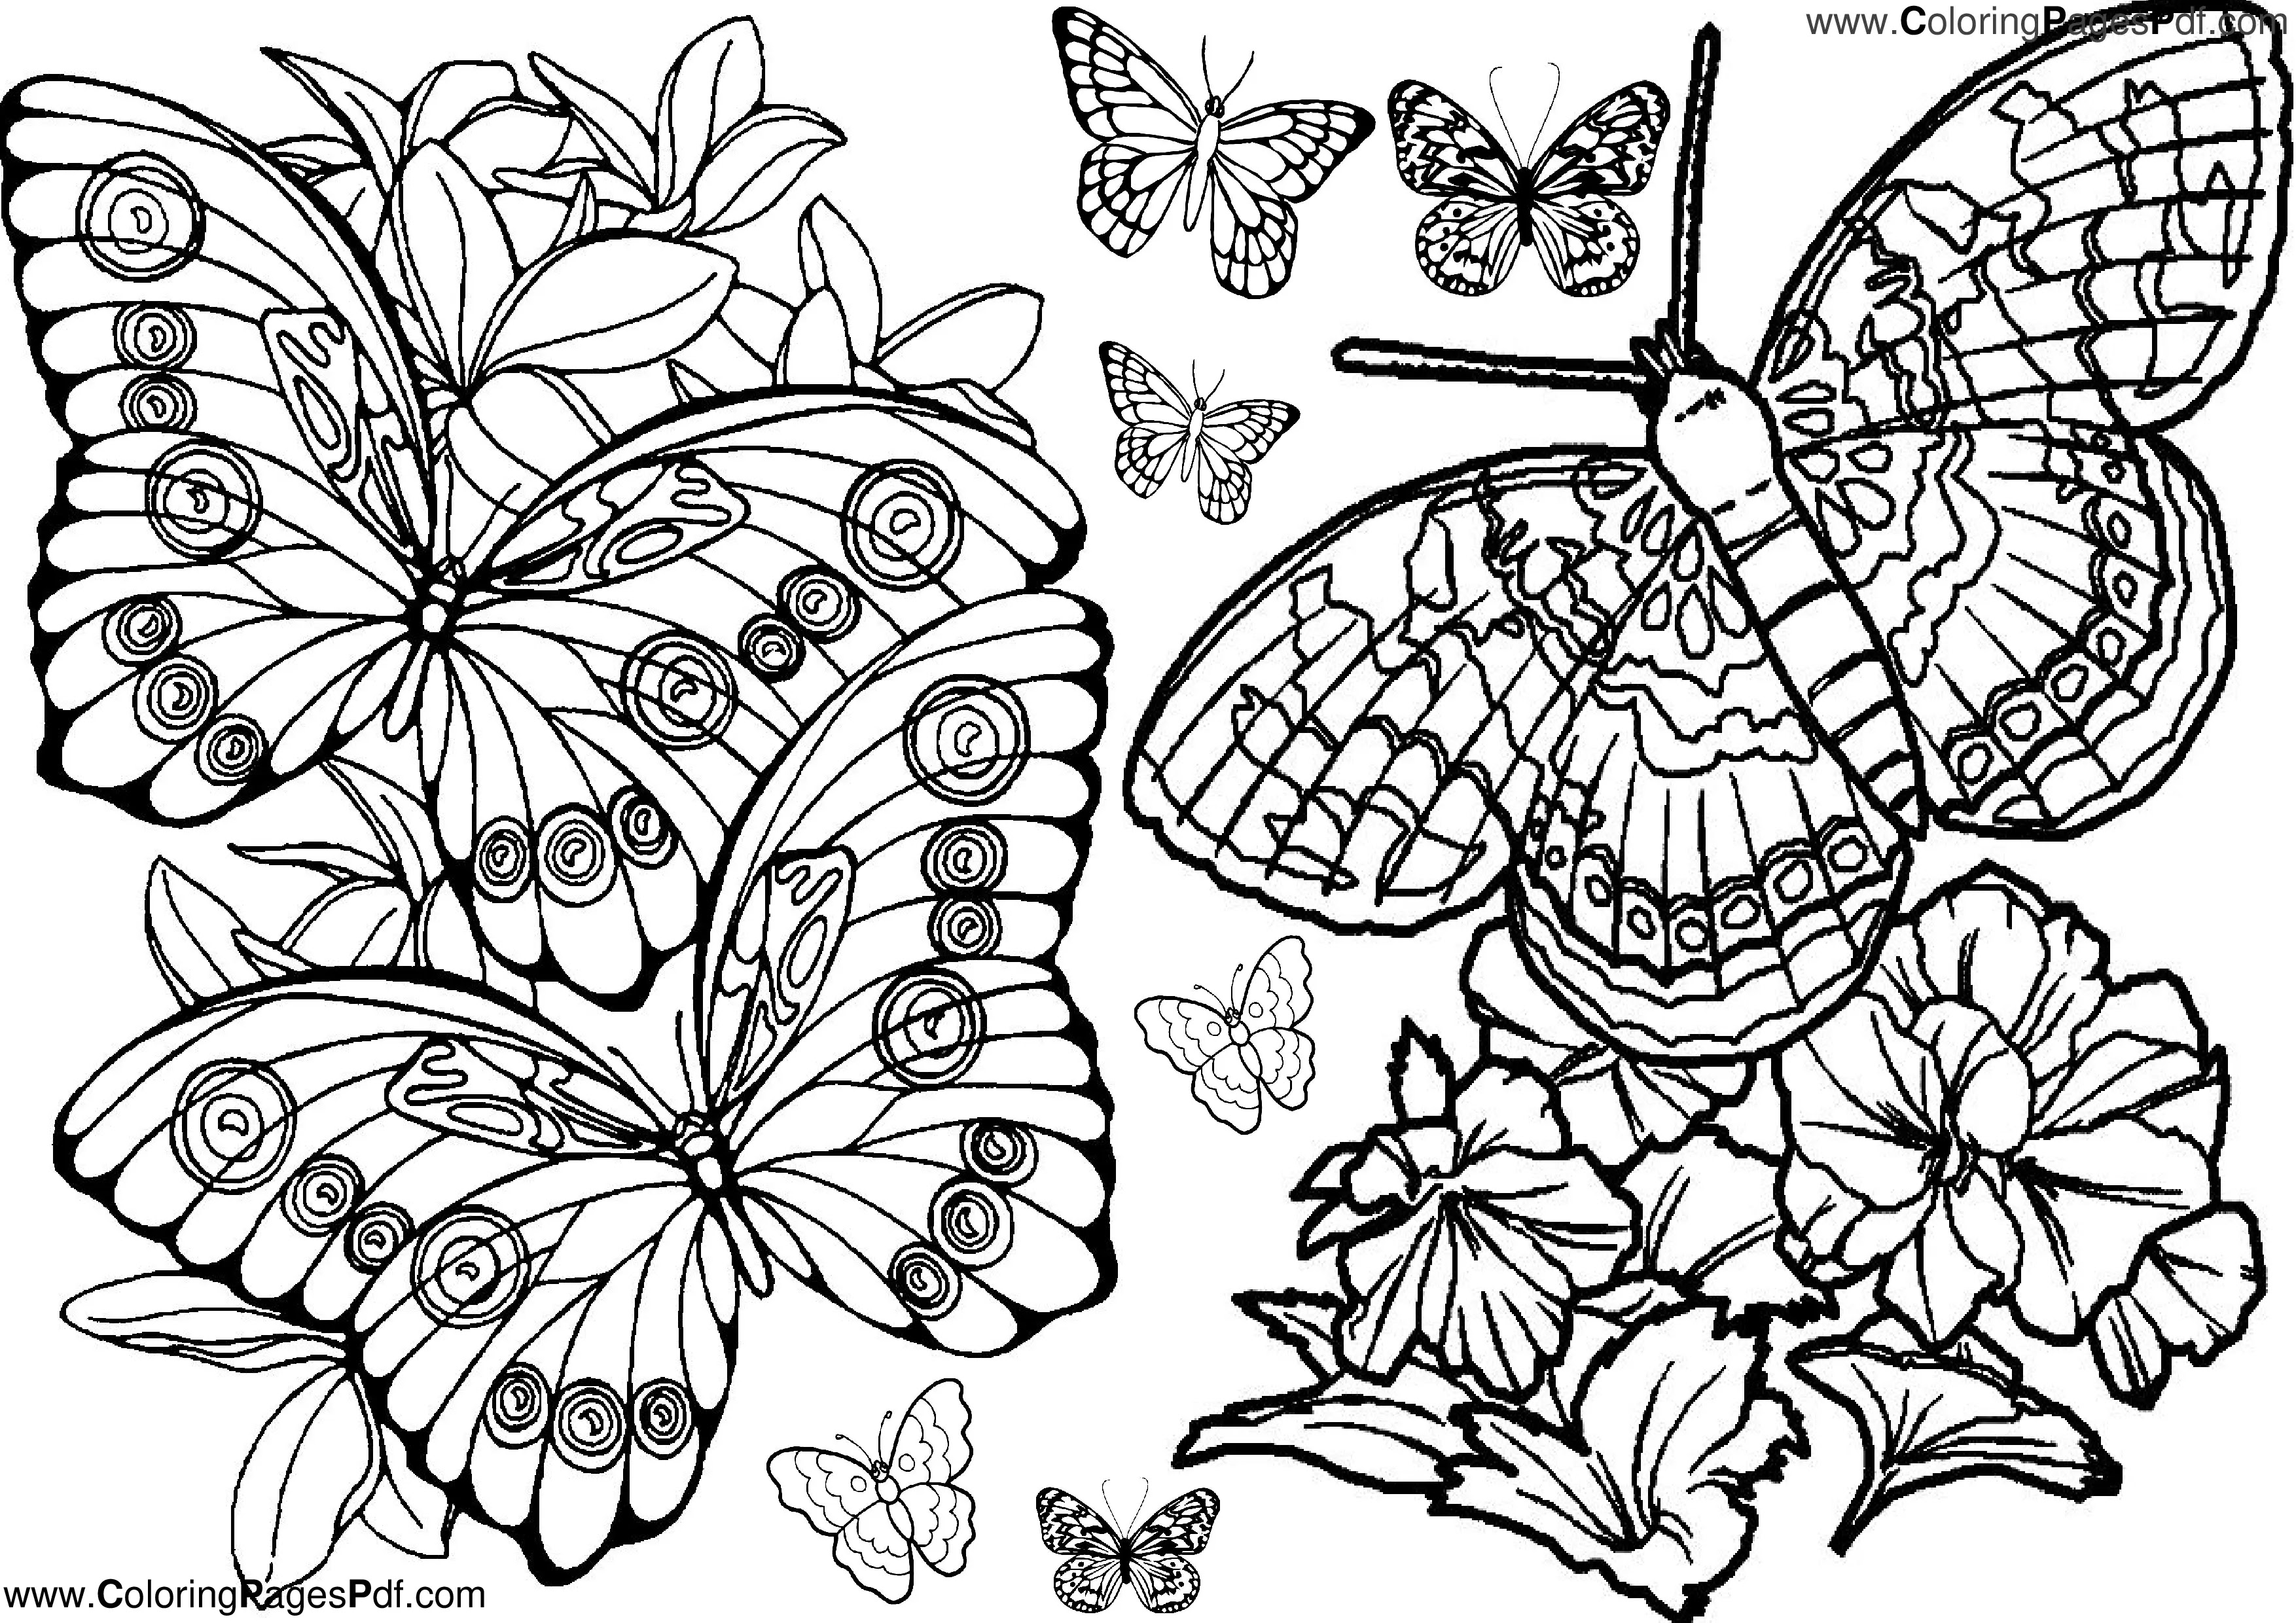 Butterfly coloring pages PDF